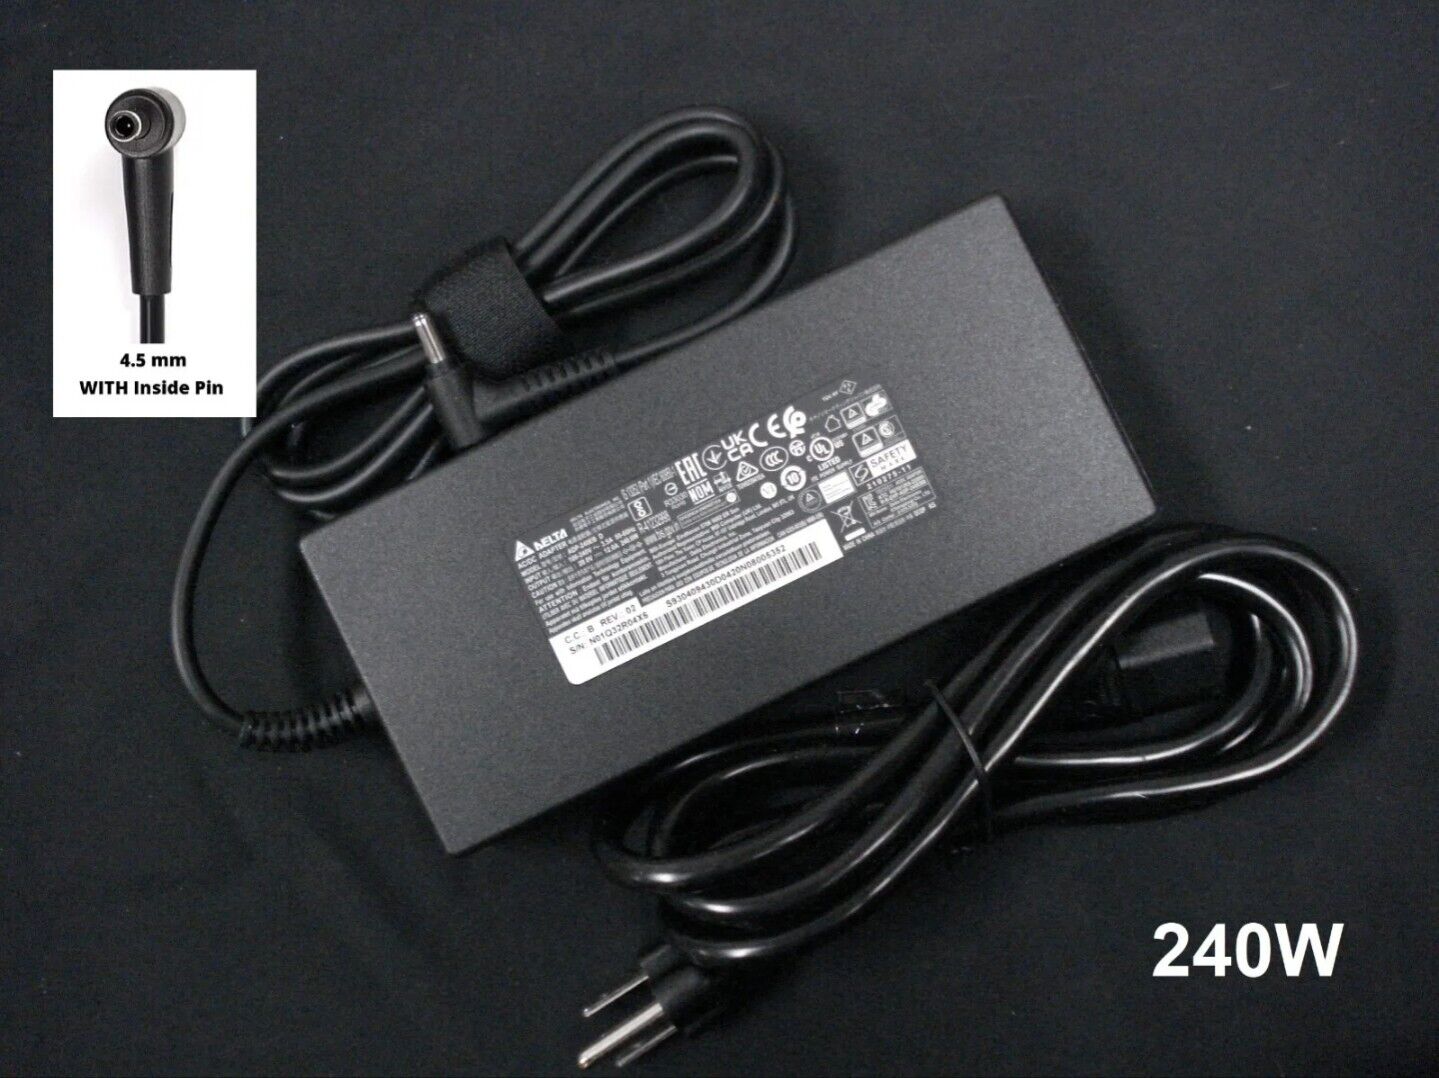 Genuine Delta ADP-240EB D Laptop Power Supply 240W Charger Adapter 4.5*3.0mm